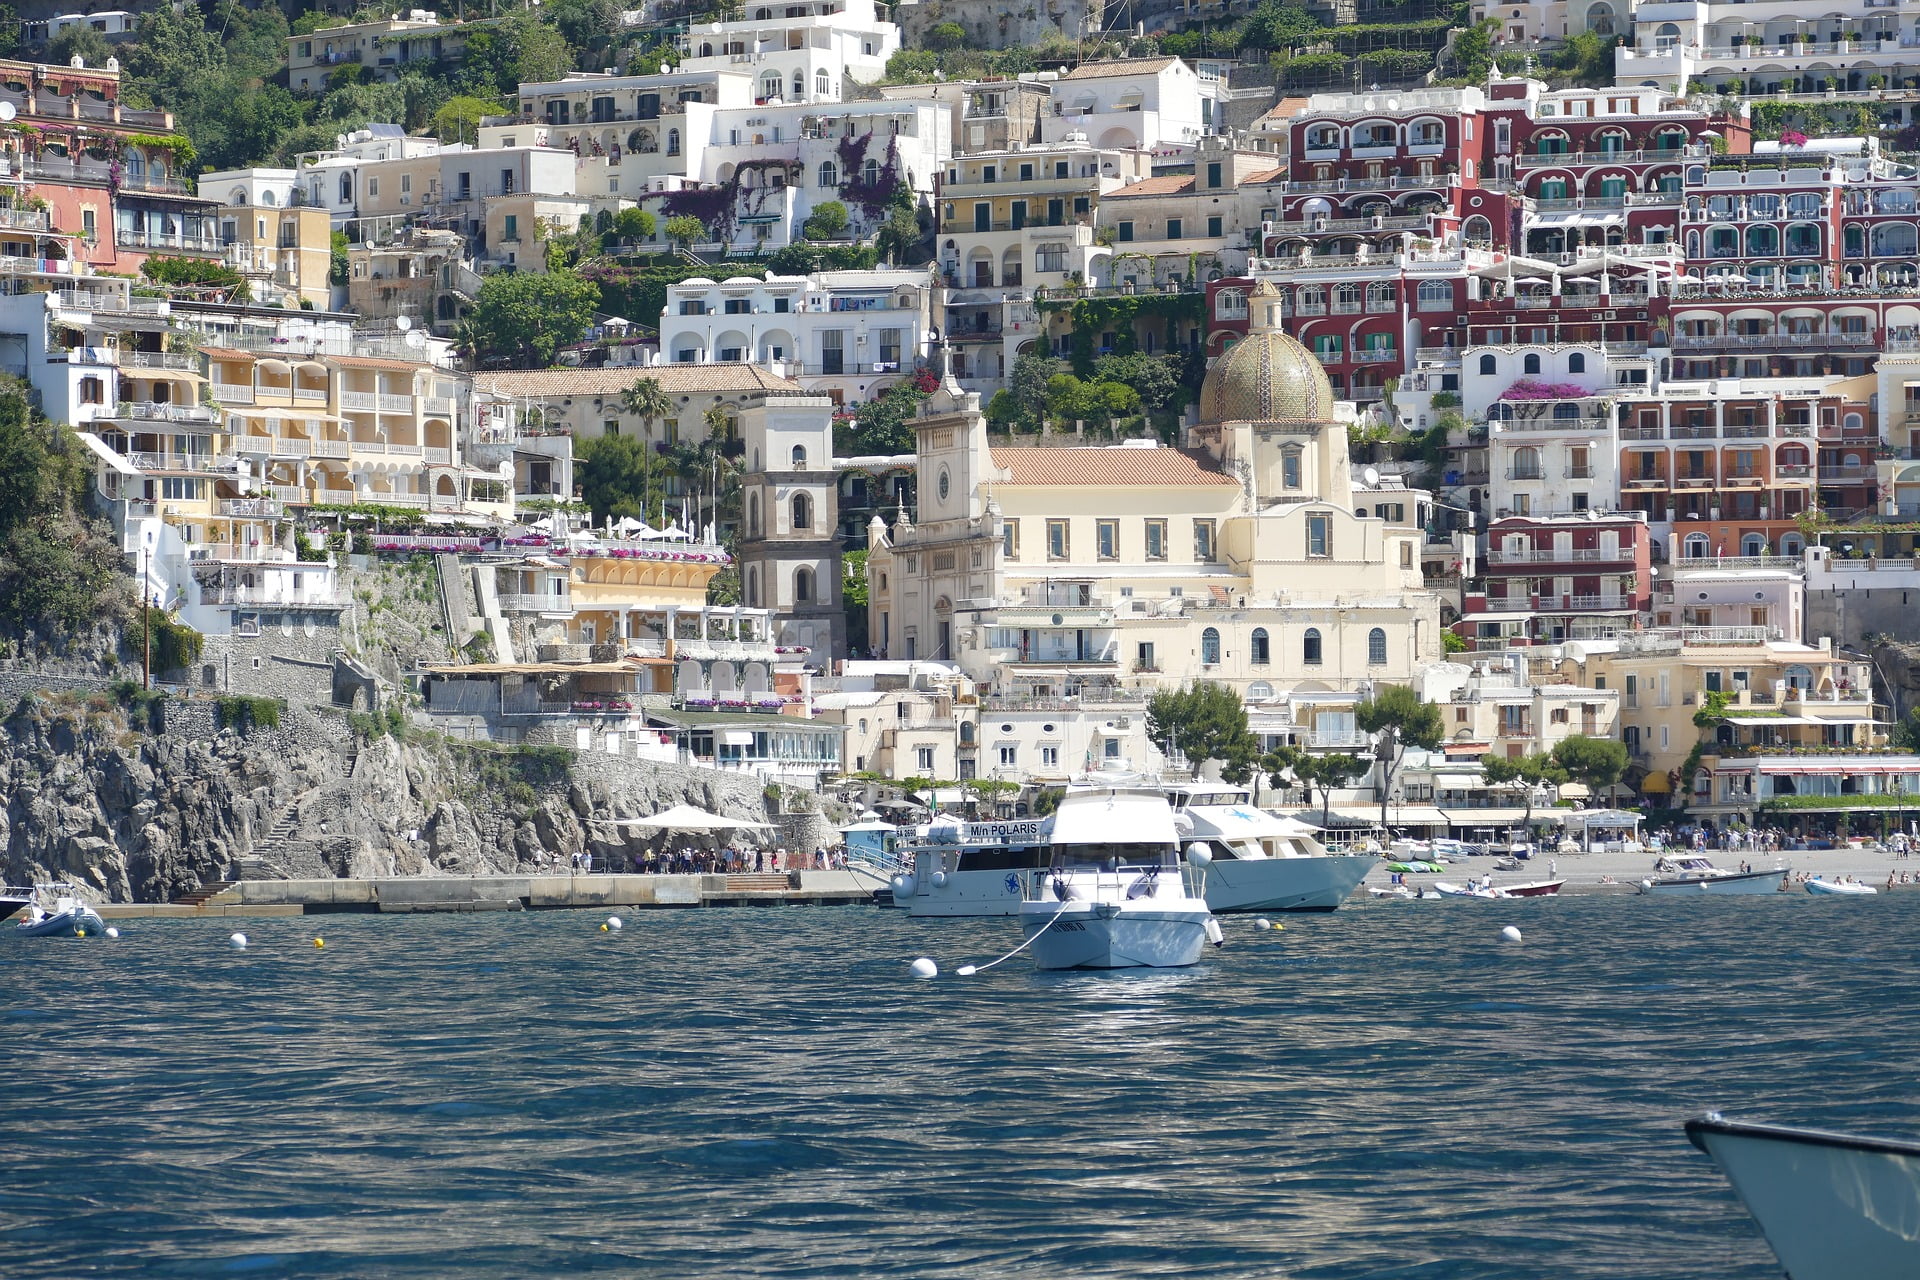 Top 23 things to do in Positano on Amalfi Coast- what to do and see